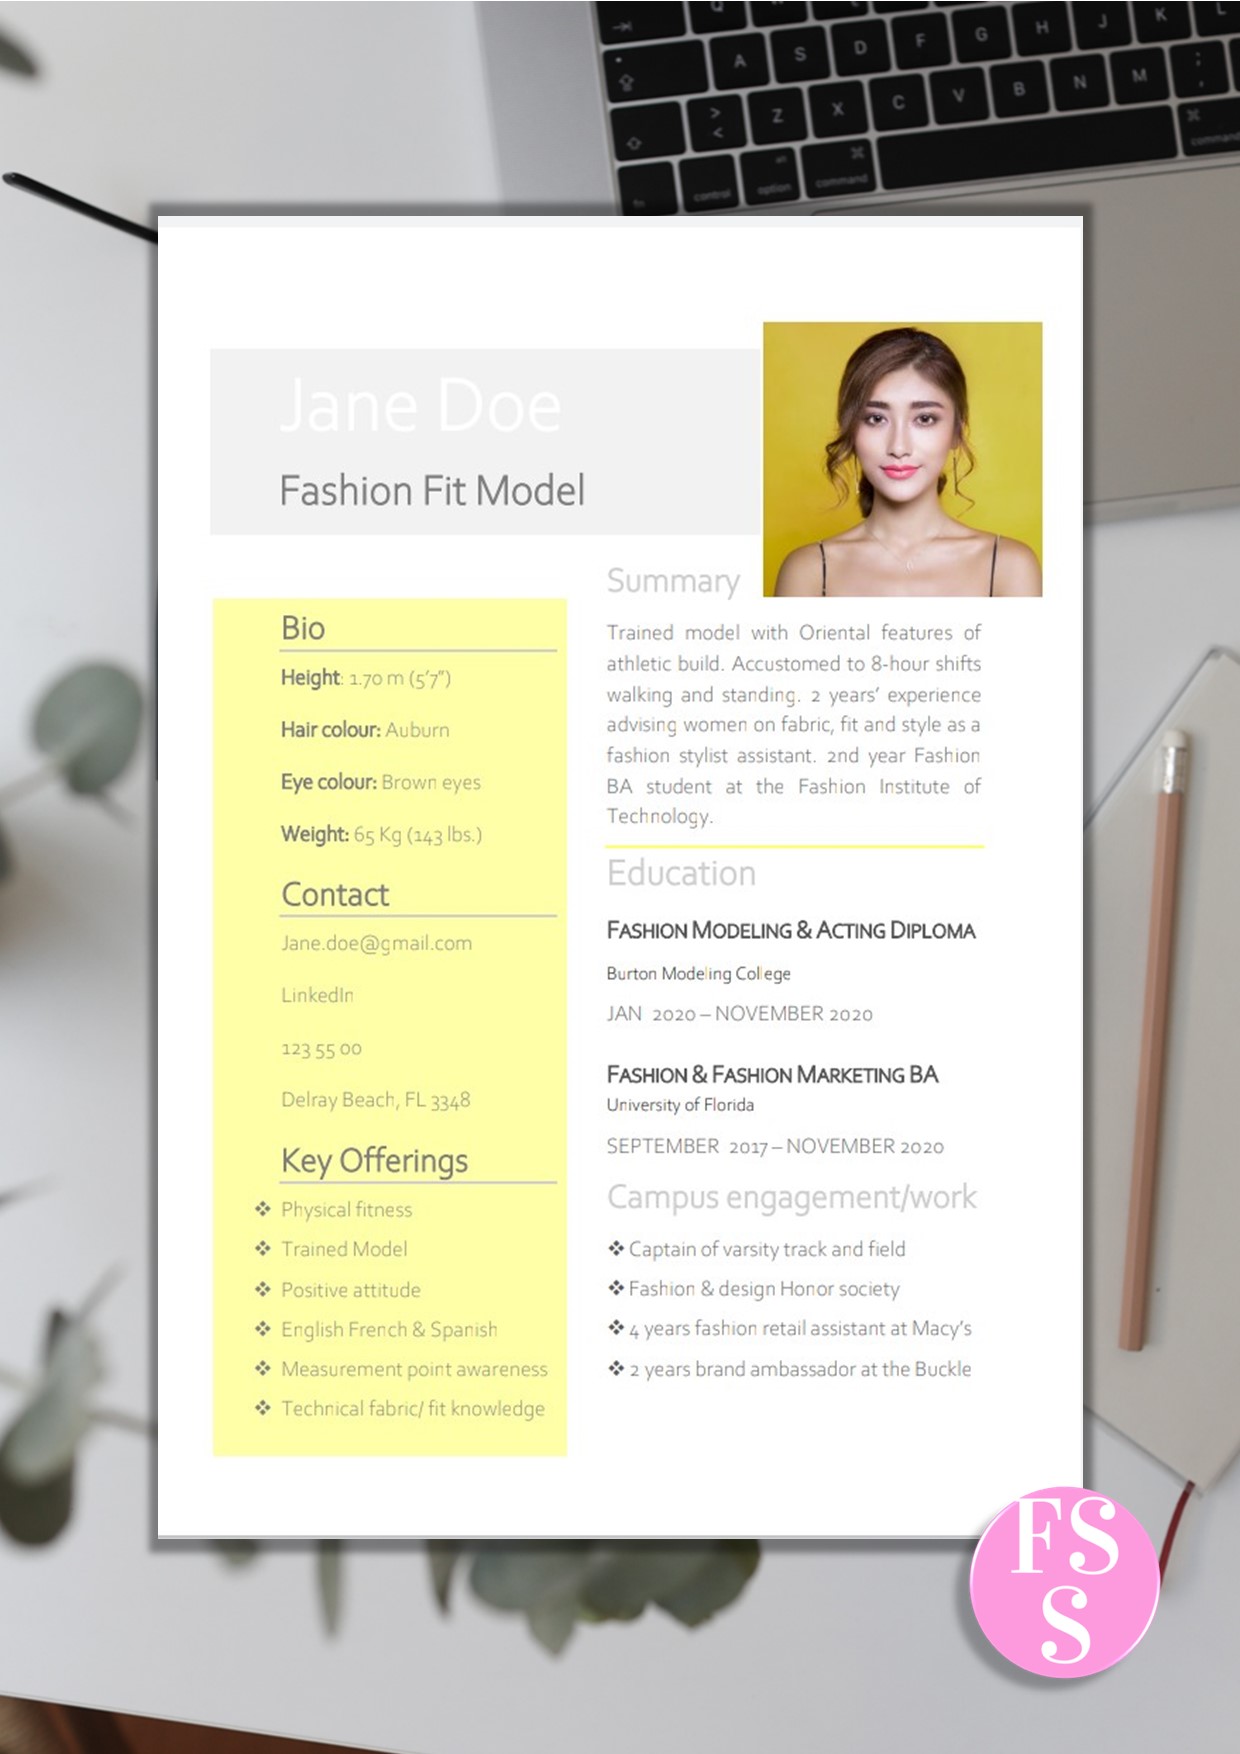 Fashion Model Resume Examples in yellow.
Creative resume design & template with photo. Features: Letter & A4 size, Word format.